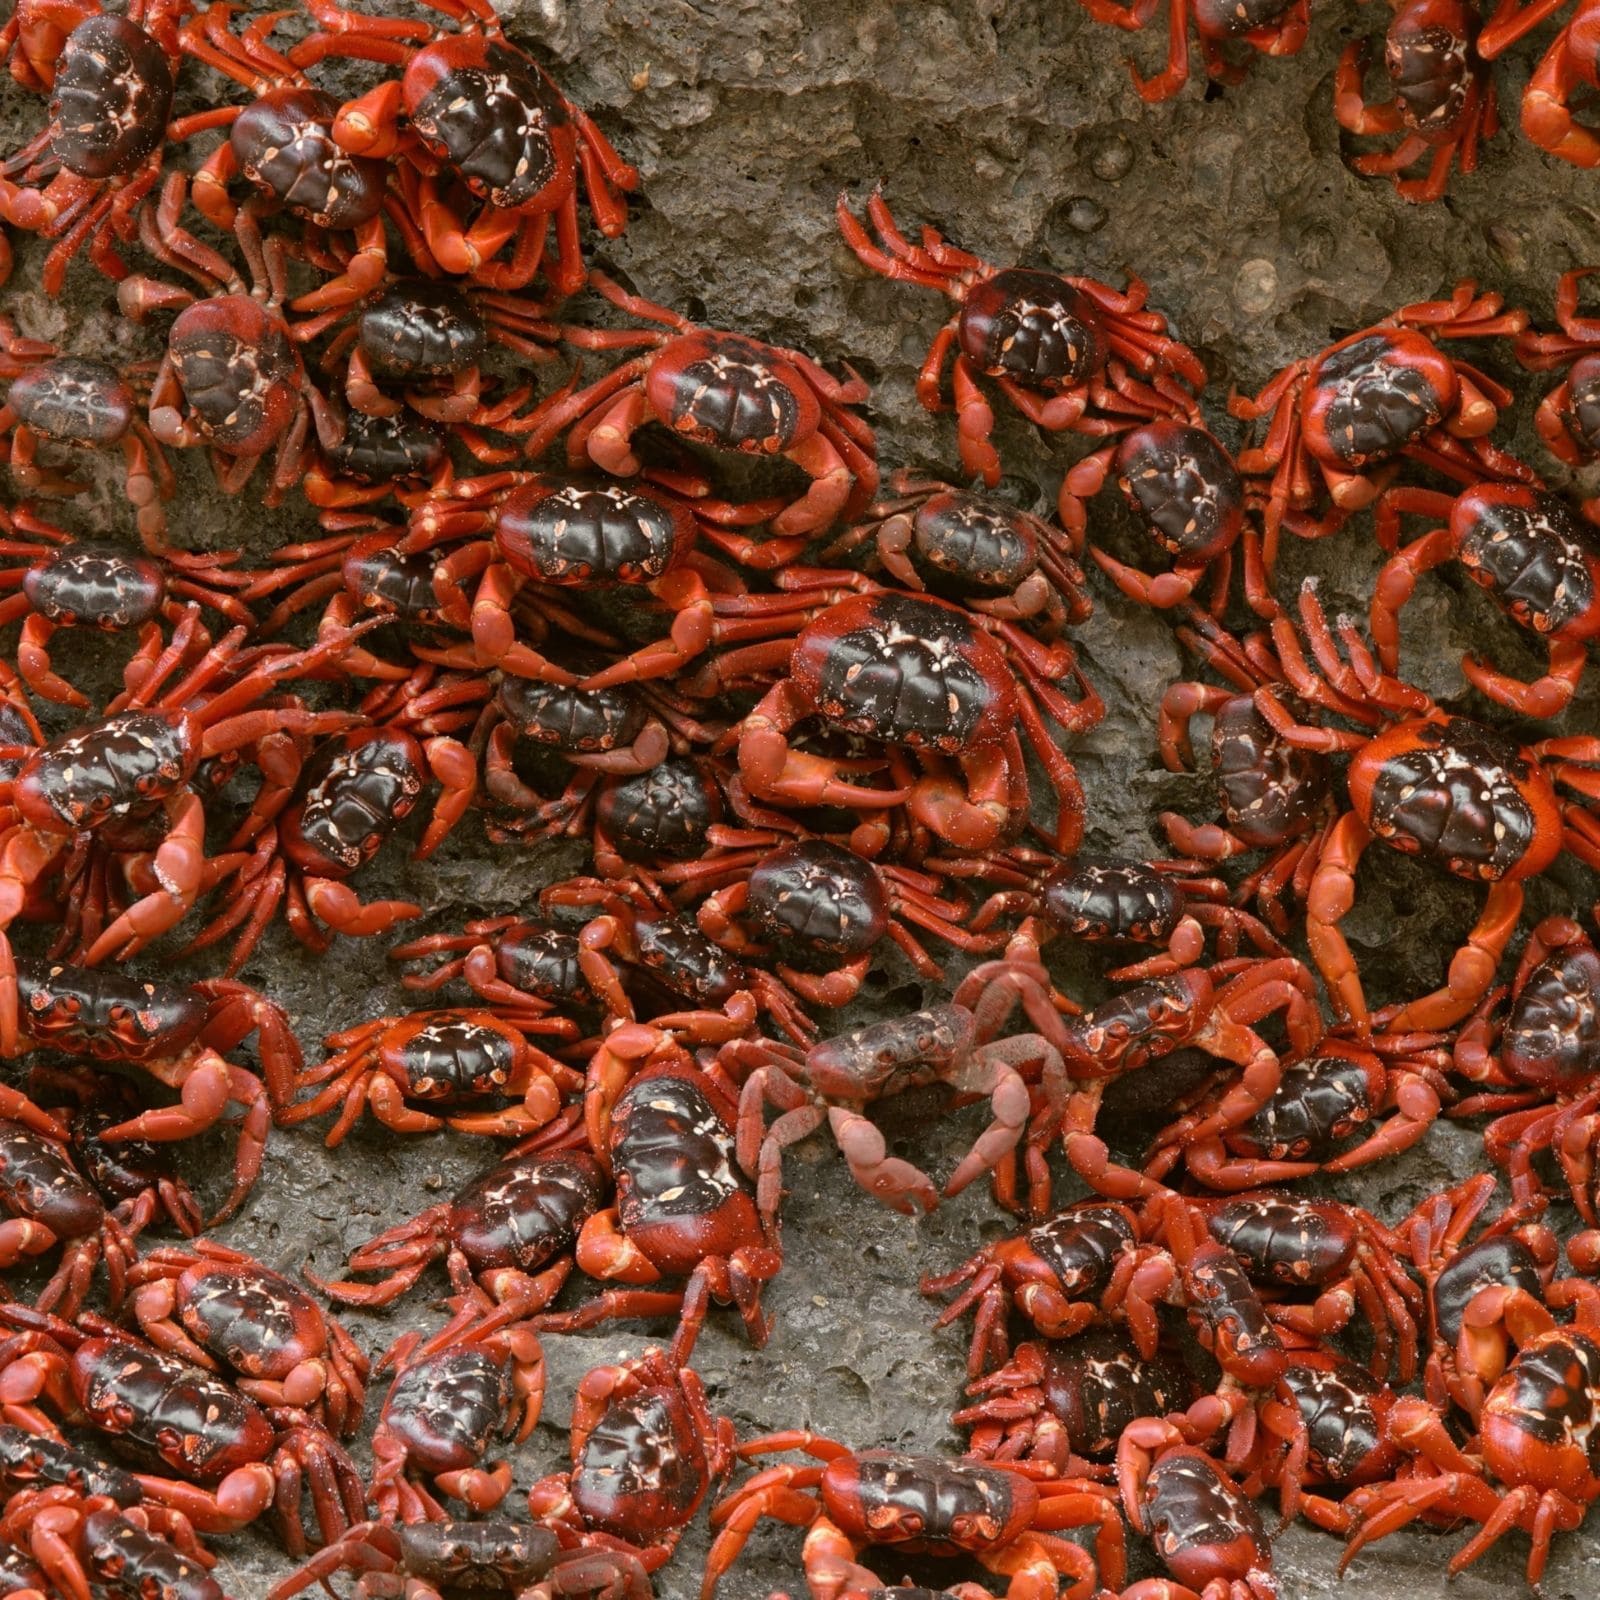 It's Merry Crabmas in Australia! Millions of Red Crabs March to